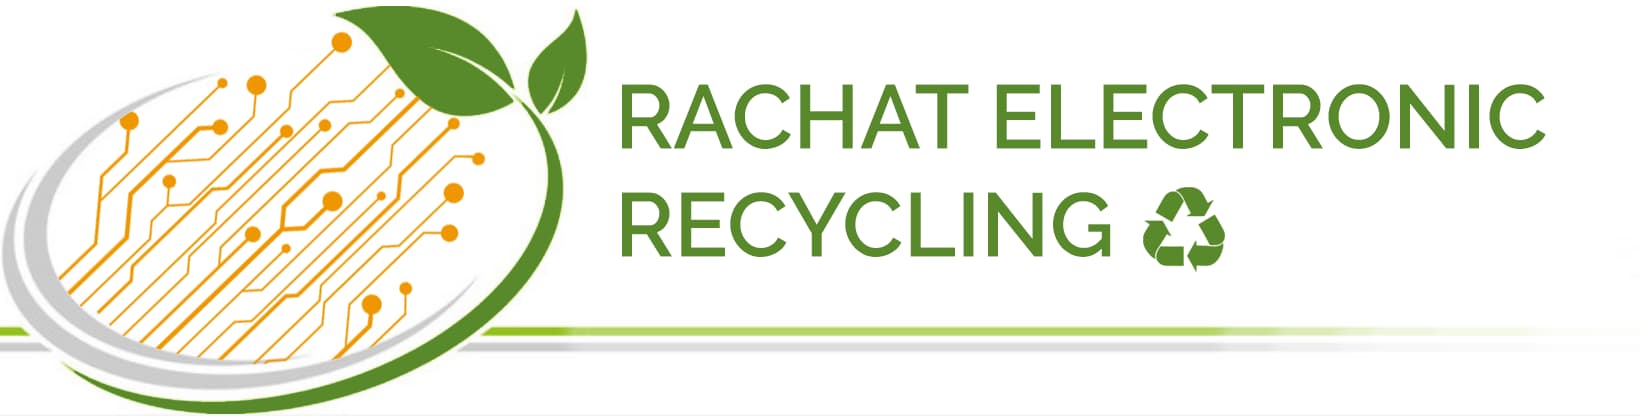 Rachat Electronic Recycling